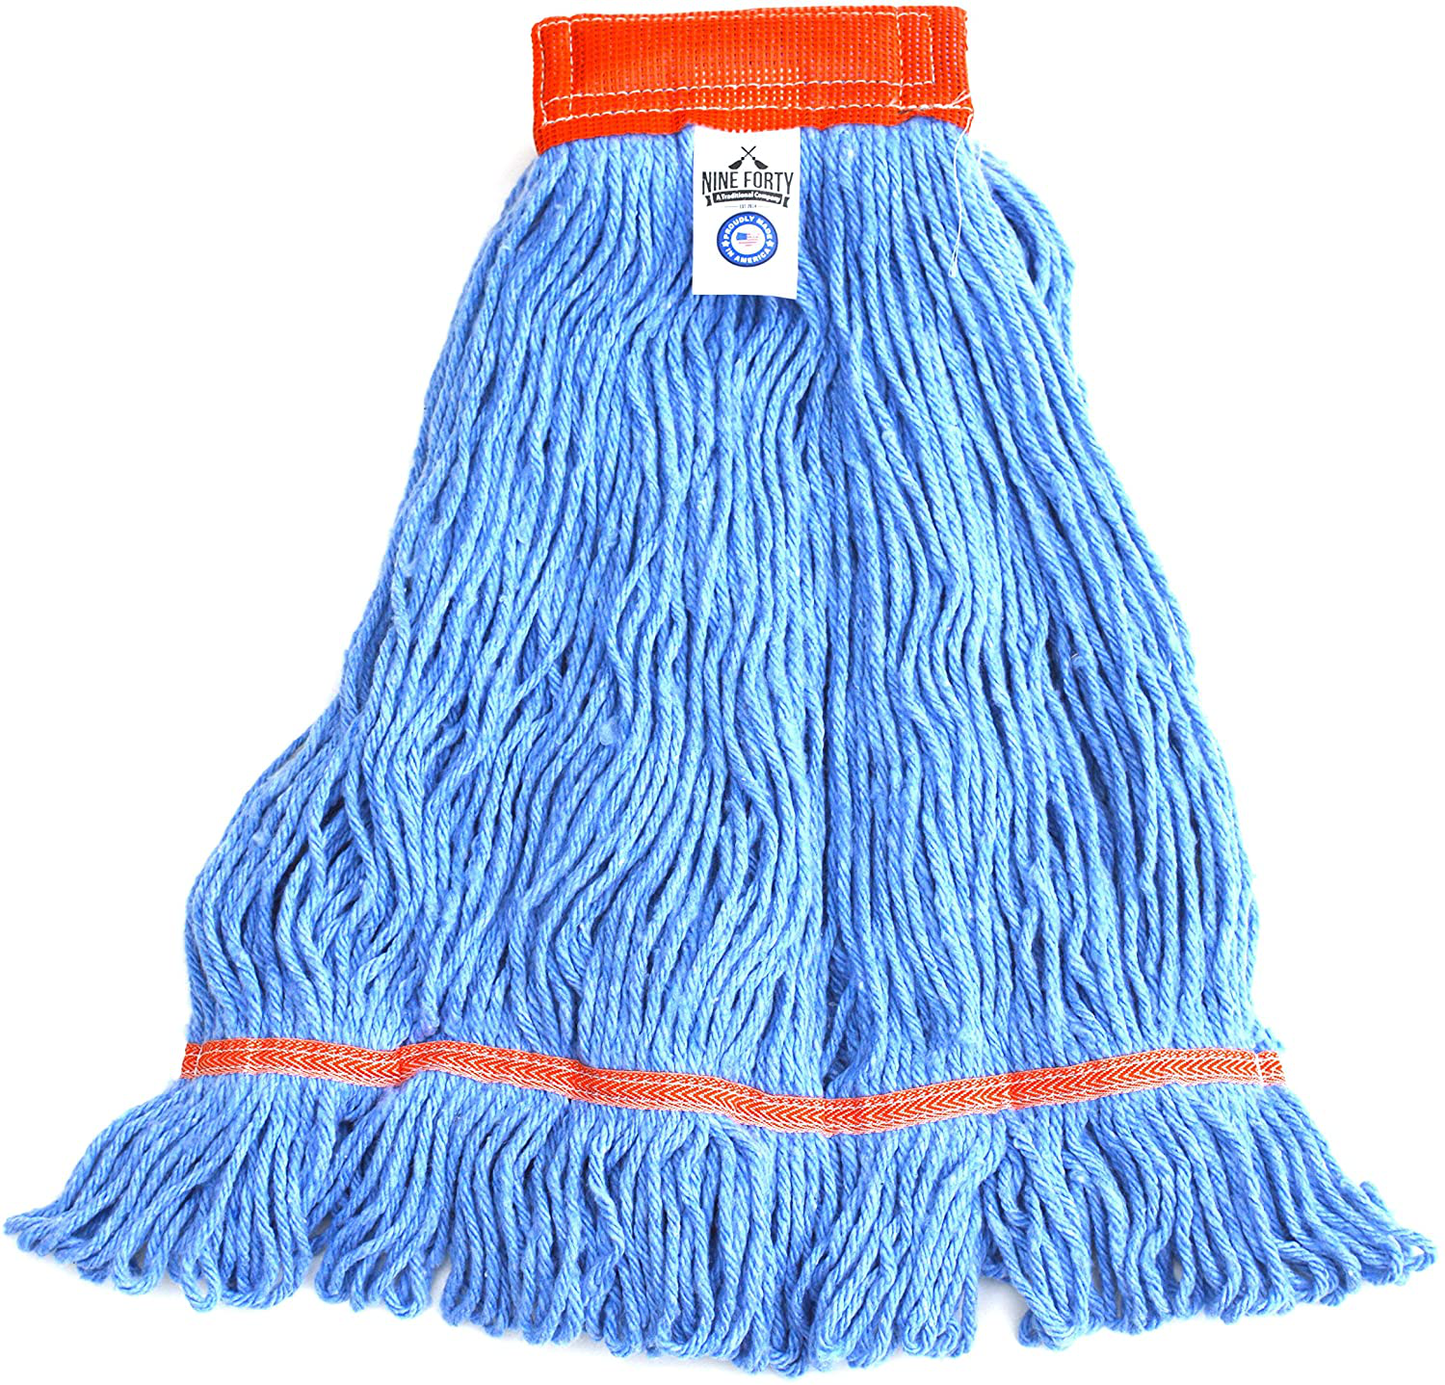 NINE FORTY USA Floor Cleaning Wet Mop Head Refill | Replacement – Janitorial Heavy Duty Industrial | Commercial Yarn (1 Pack, Large)